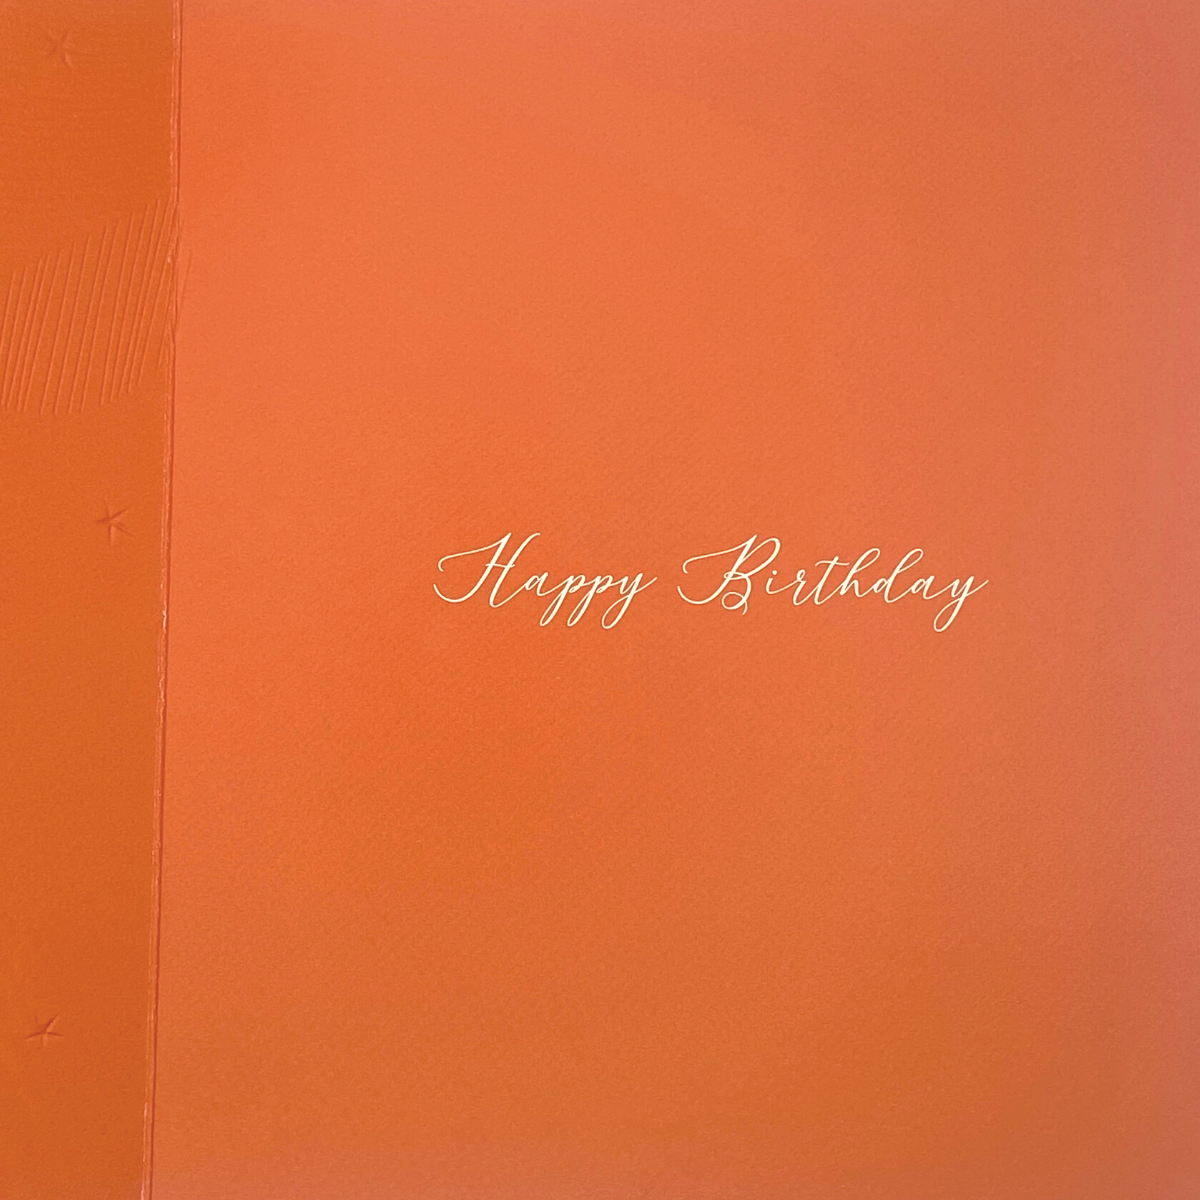 Inside image with bright orange card and white verse